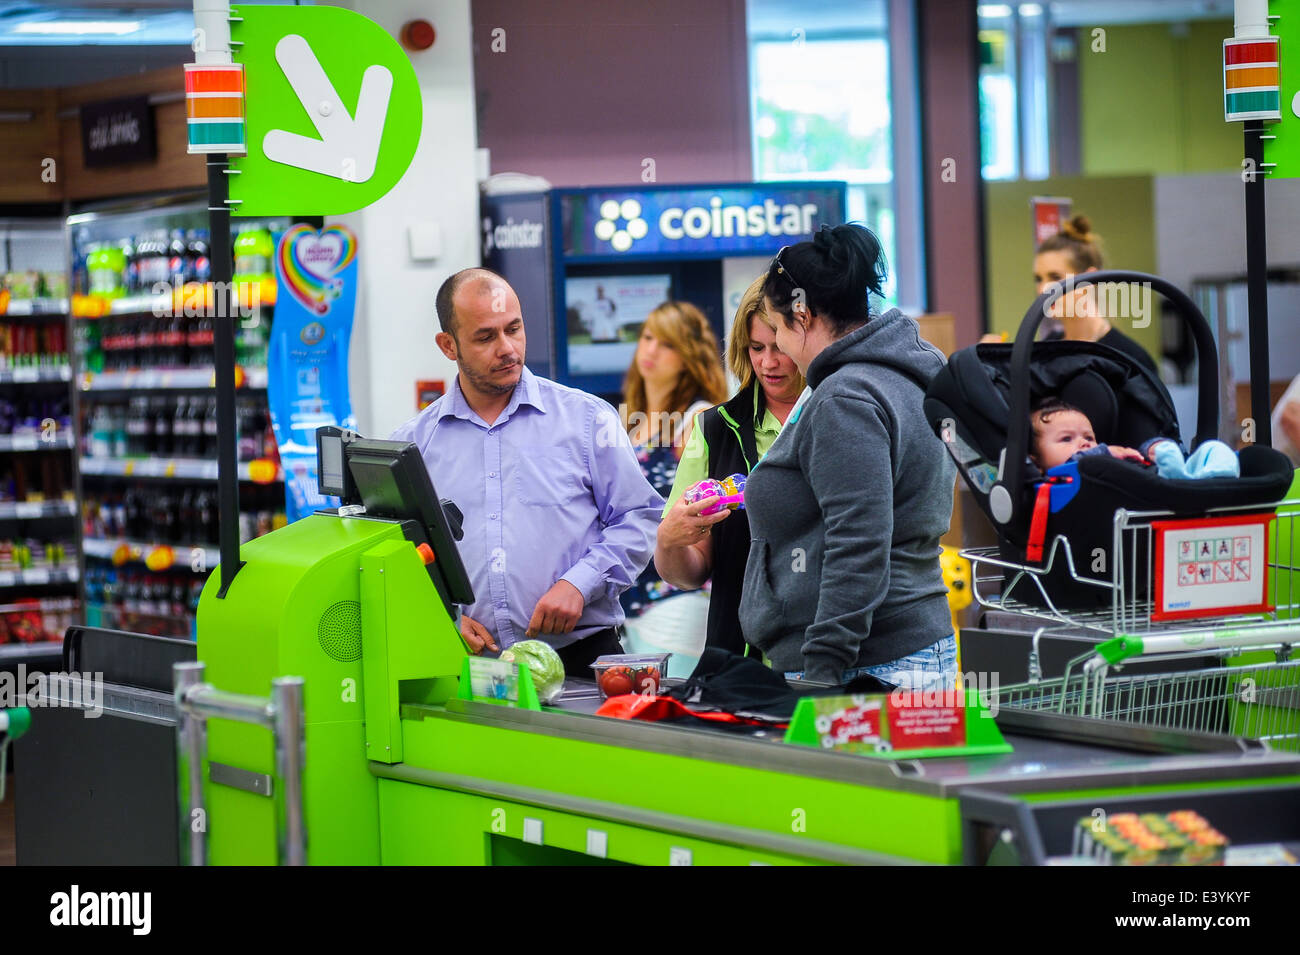 assistant helping couple use a self-service checkout in a supermarket Stock Photo